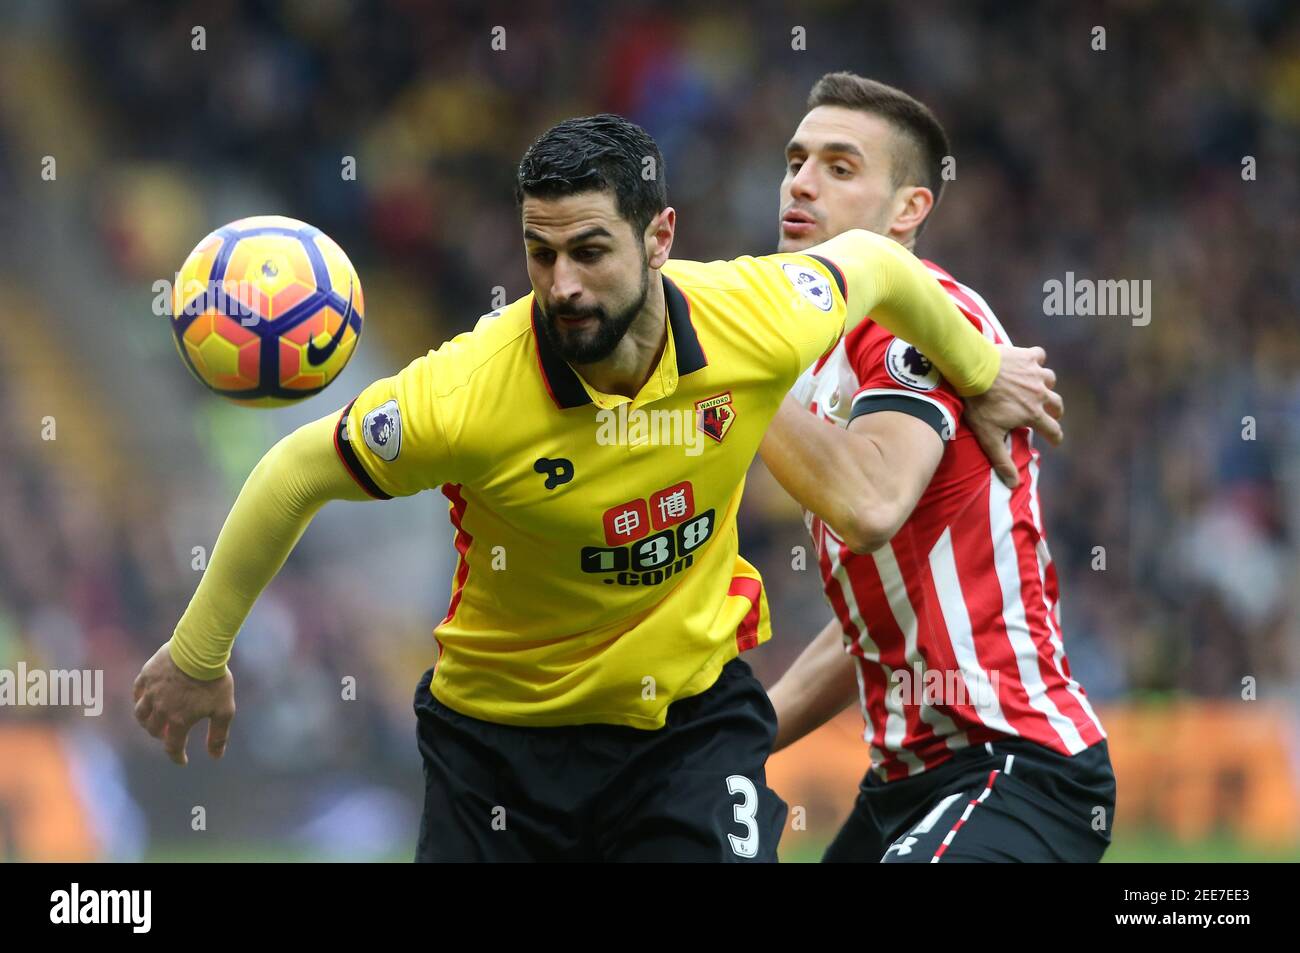 Britain Soccer Football - Watford v Southampton - Premier League - Vicarage Road - 4/3/17 Watford's Miguel Britos in action with Southampton's Dusan Tadic  Reuters / Paul Hackett Livepic EDITORIAL USE ONLY. No use with unauthorized audio, video, data, fixture lists, club/league logos or 'live' services. Online in-match use limited to 45 images, no video emulation. No use in betting, games or single club/league/player publications.  Please contact your account representative for further details. Stock Photo